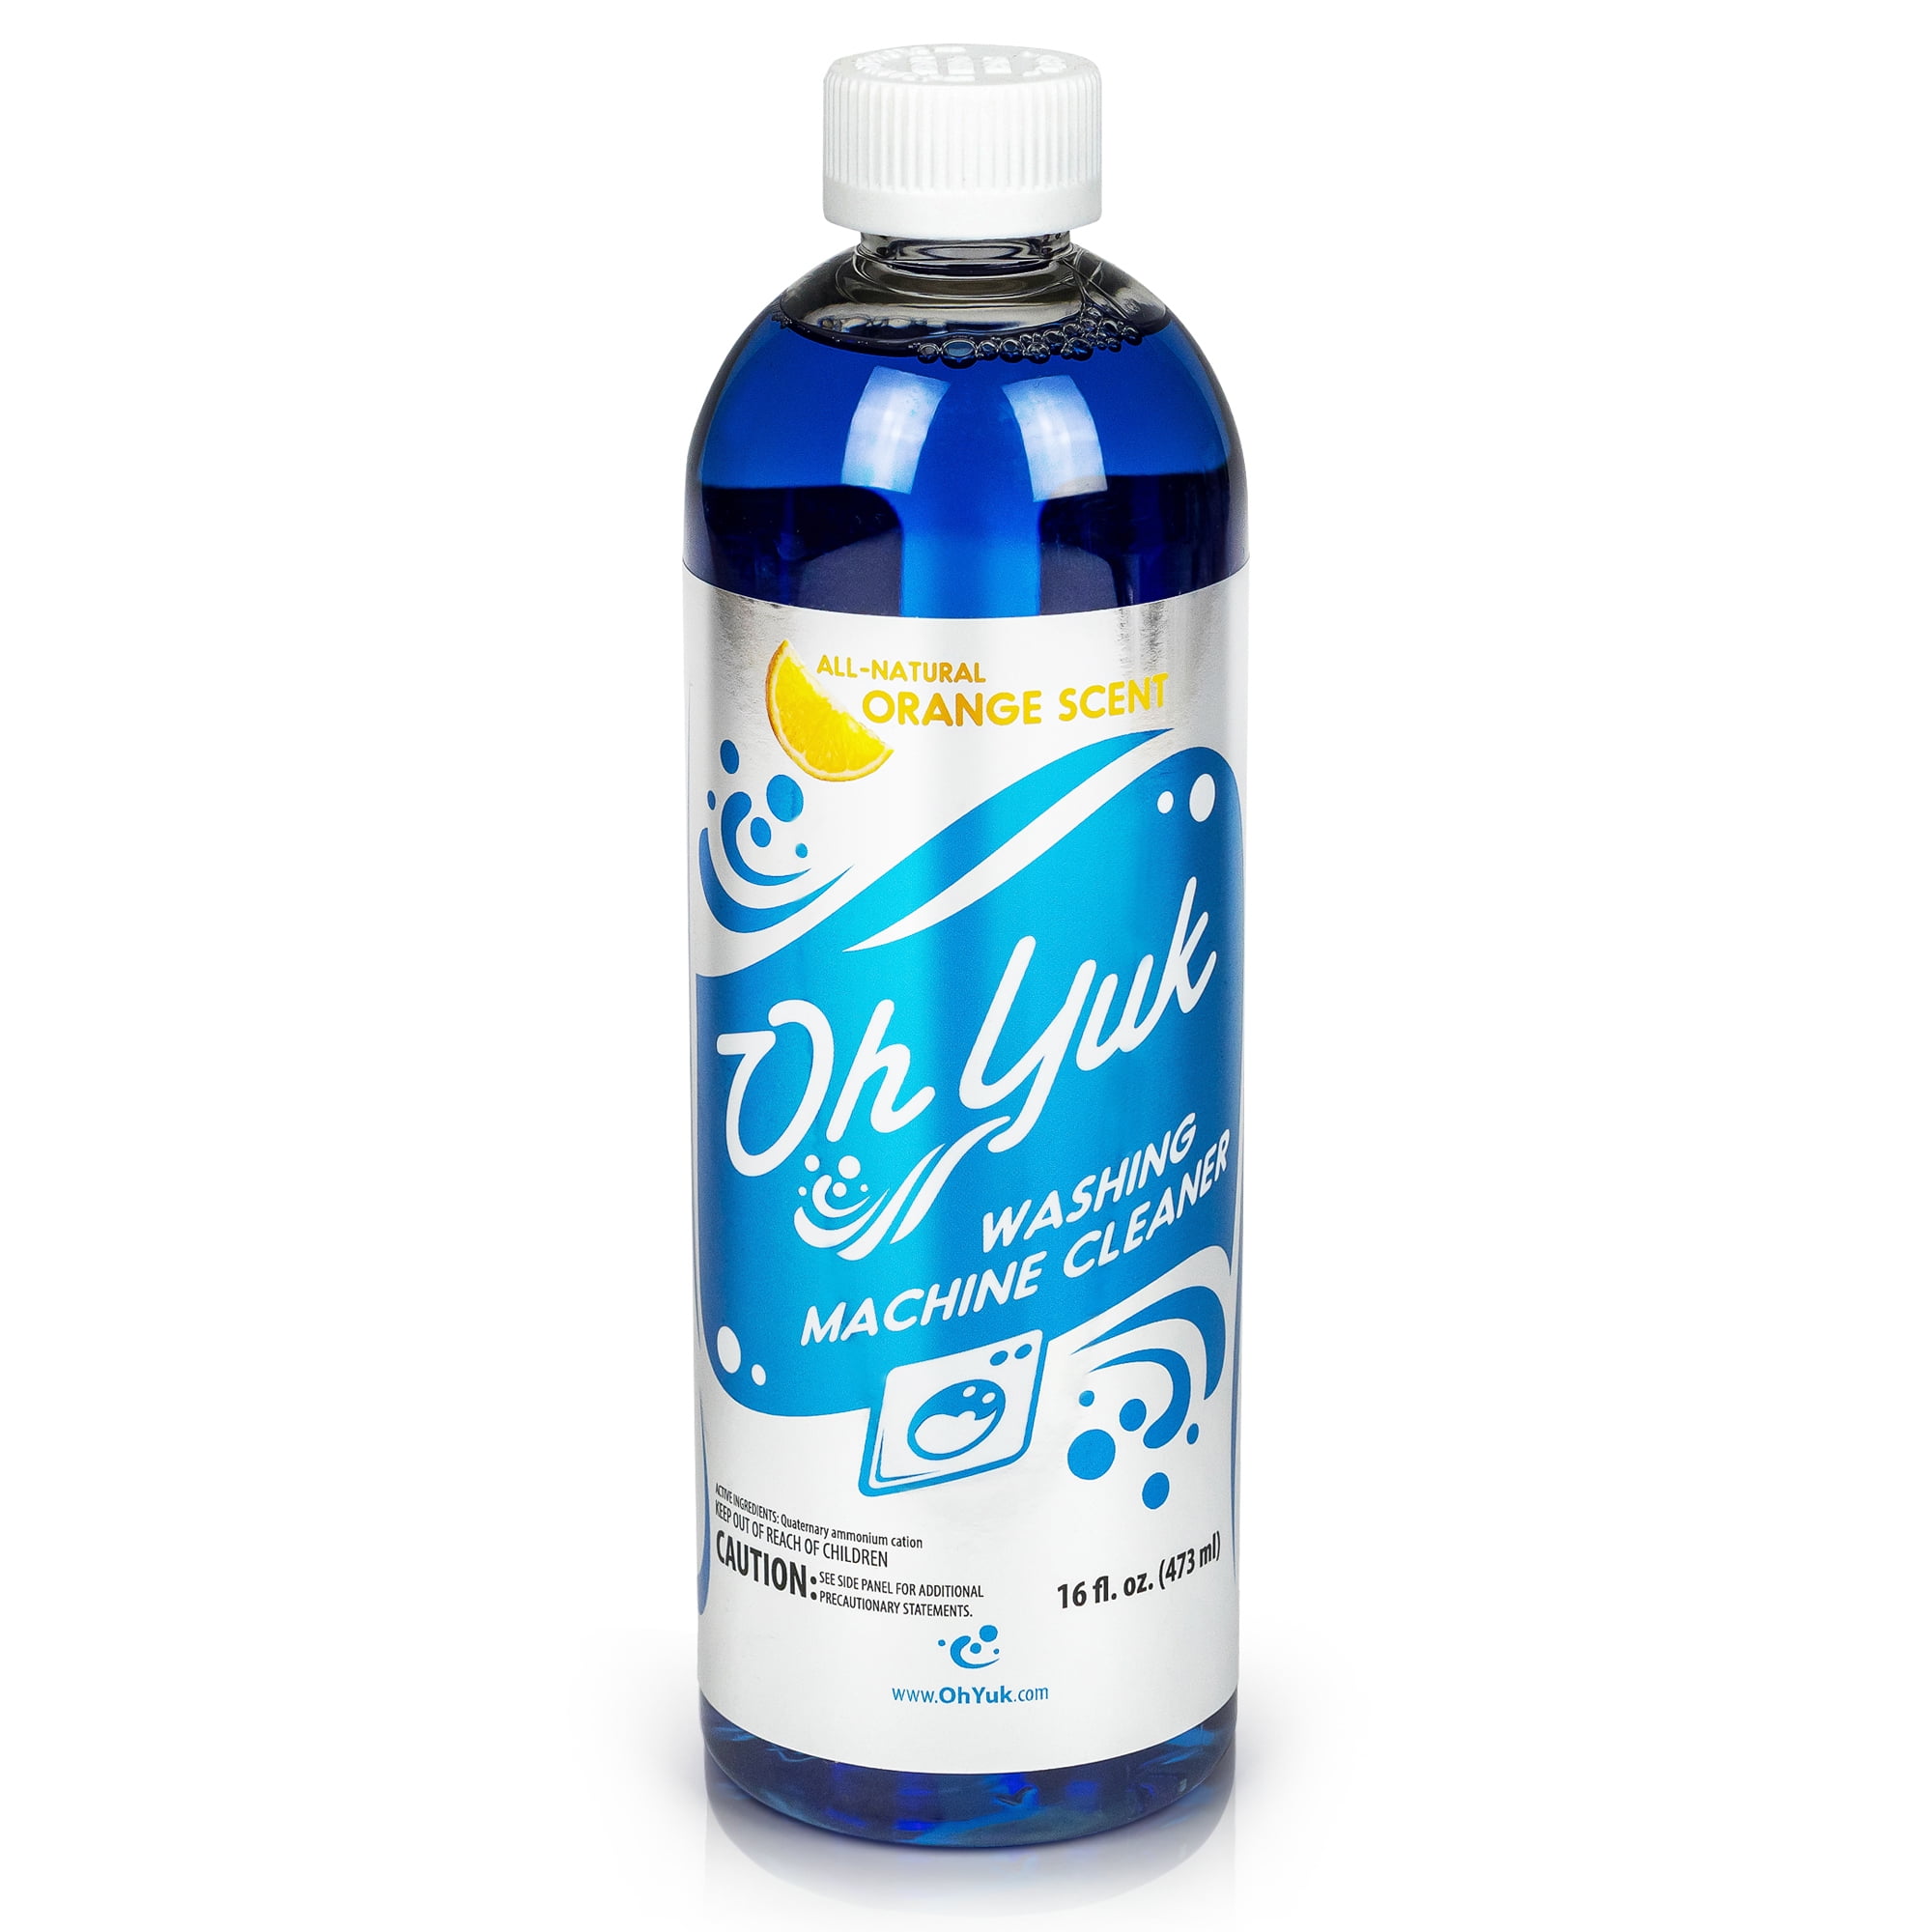 Oh Yuk Washing Machine Cleaner For All Washers (Top Load, Front Load, HE  and Non-HE), Natural Citrus Fragrance, Four Cleanings Per Bottle, Septic  Safe, 16 Fl Oz 